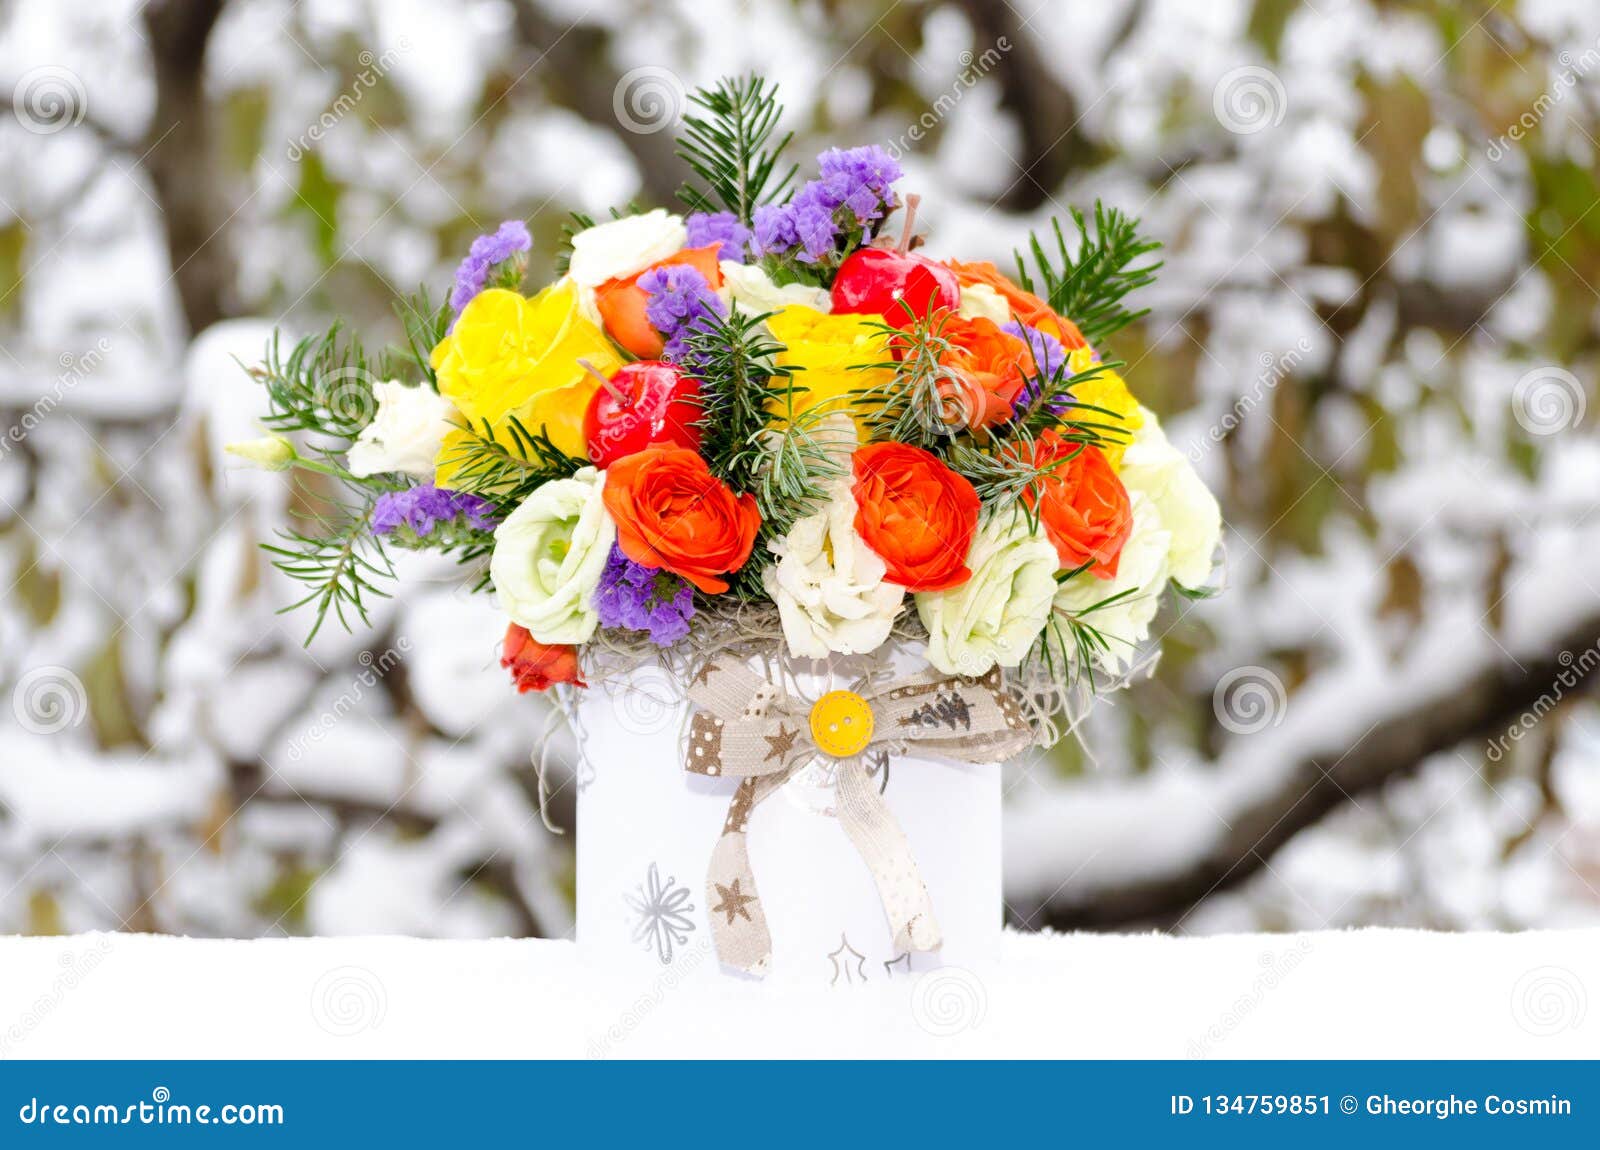 colorful floral arrangement in the snow